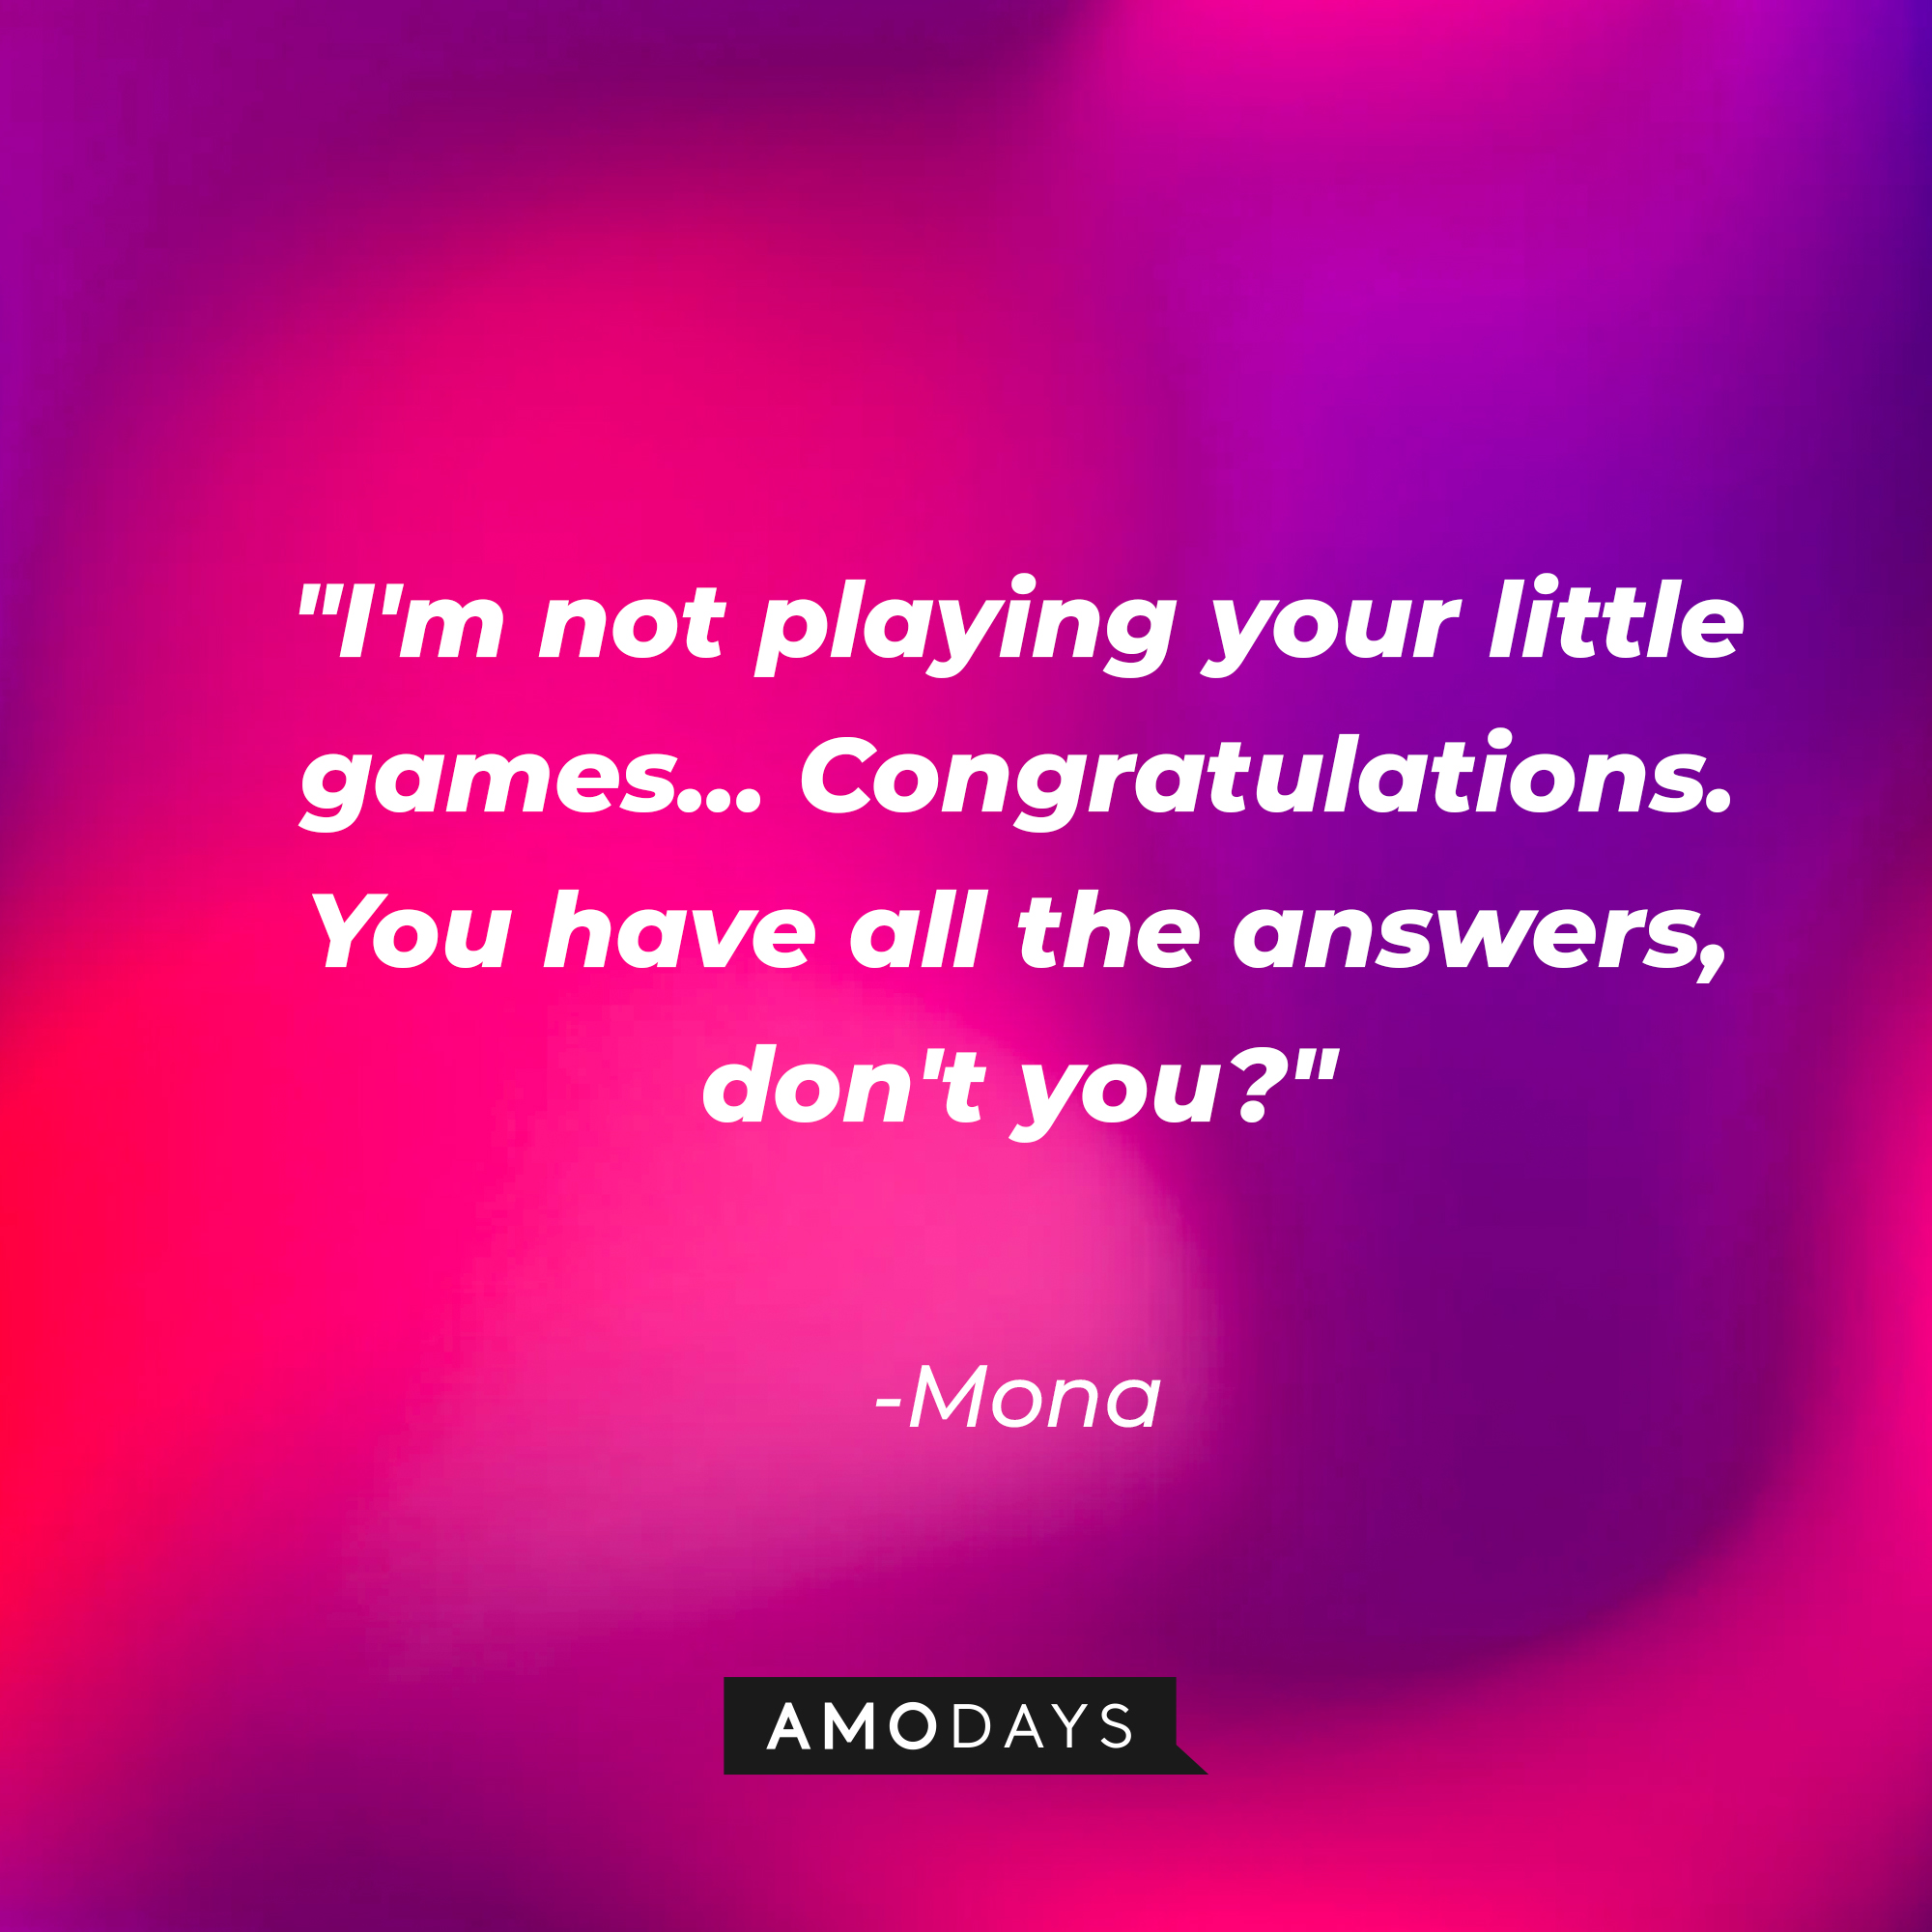 Mona's quote: "I'm not playing your little games... Congratulations. You have all the answers, don't you?" | Source: AmoDays